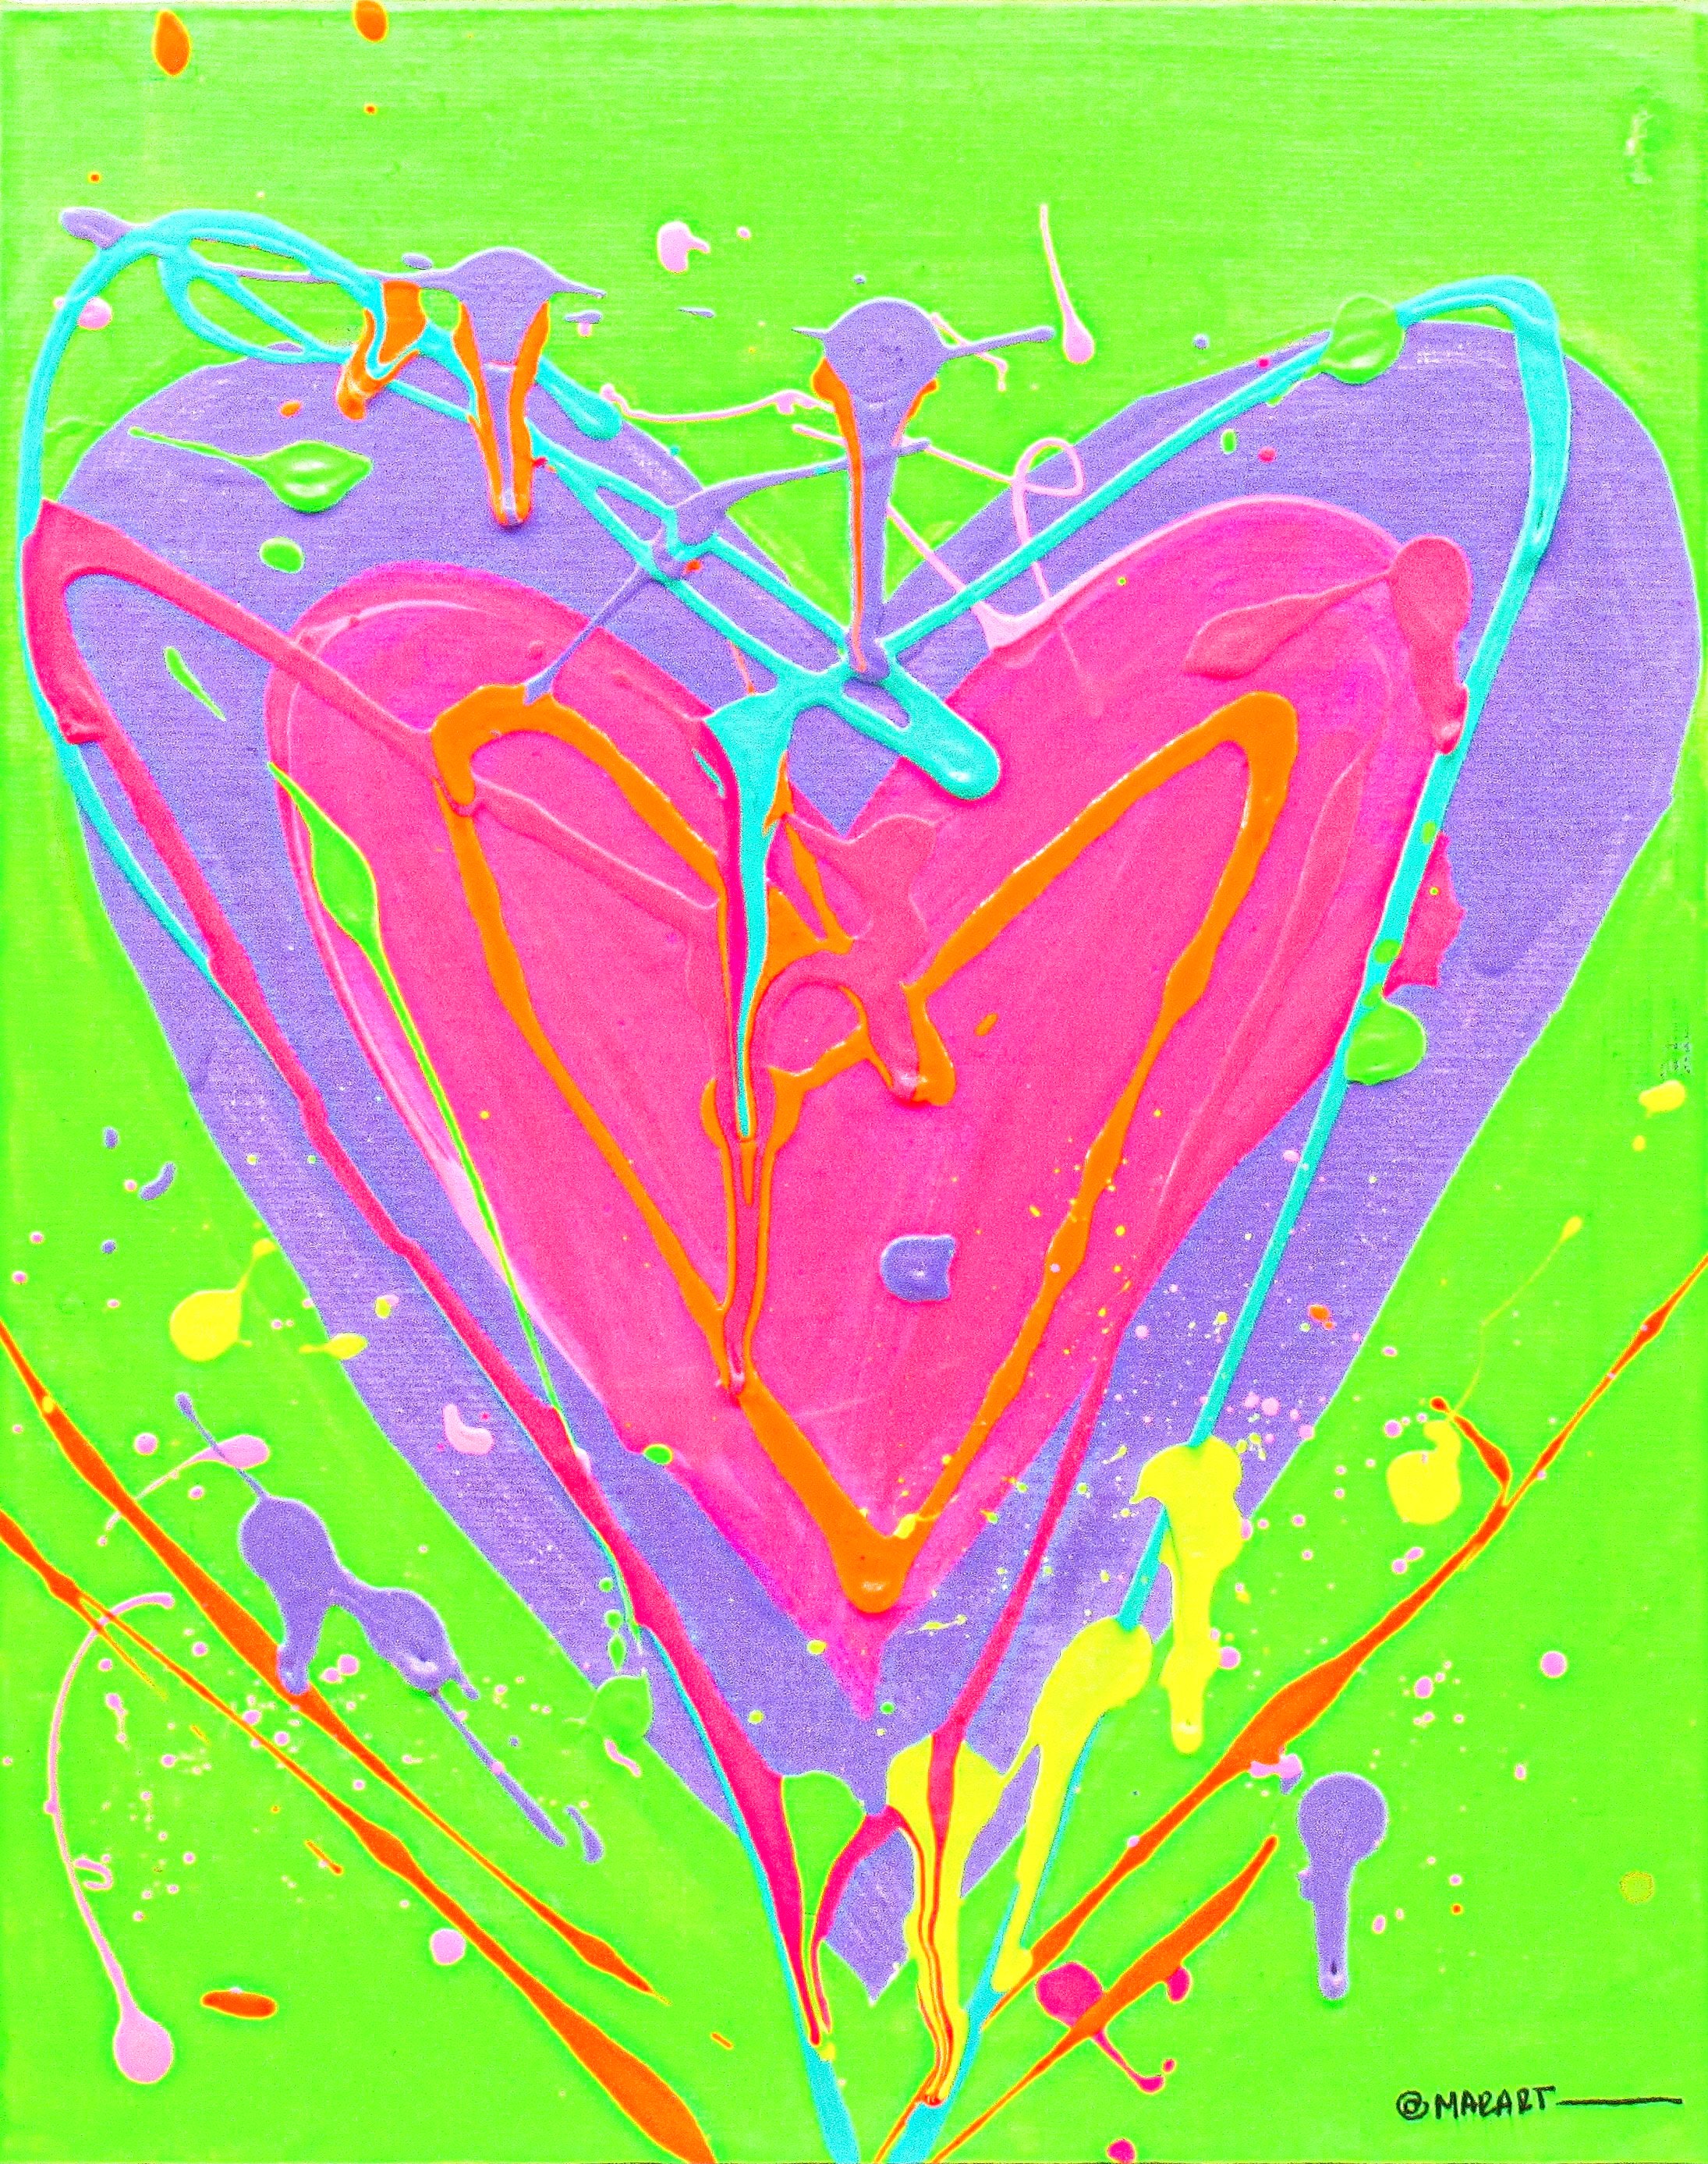 Heart Painting, Painting of Hearts, Canvas of Hearts, Acrylic Hearts, Art  Decoration, Decoration for Children, Baby's Room, Colored Hearts 